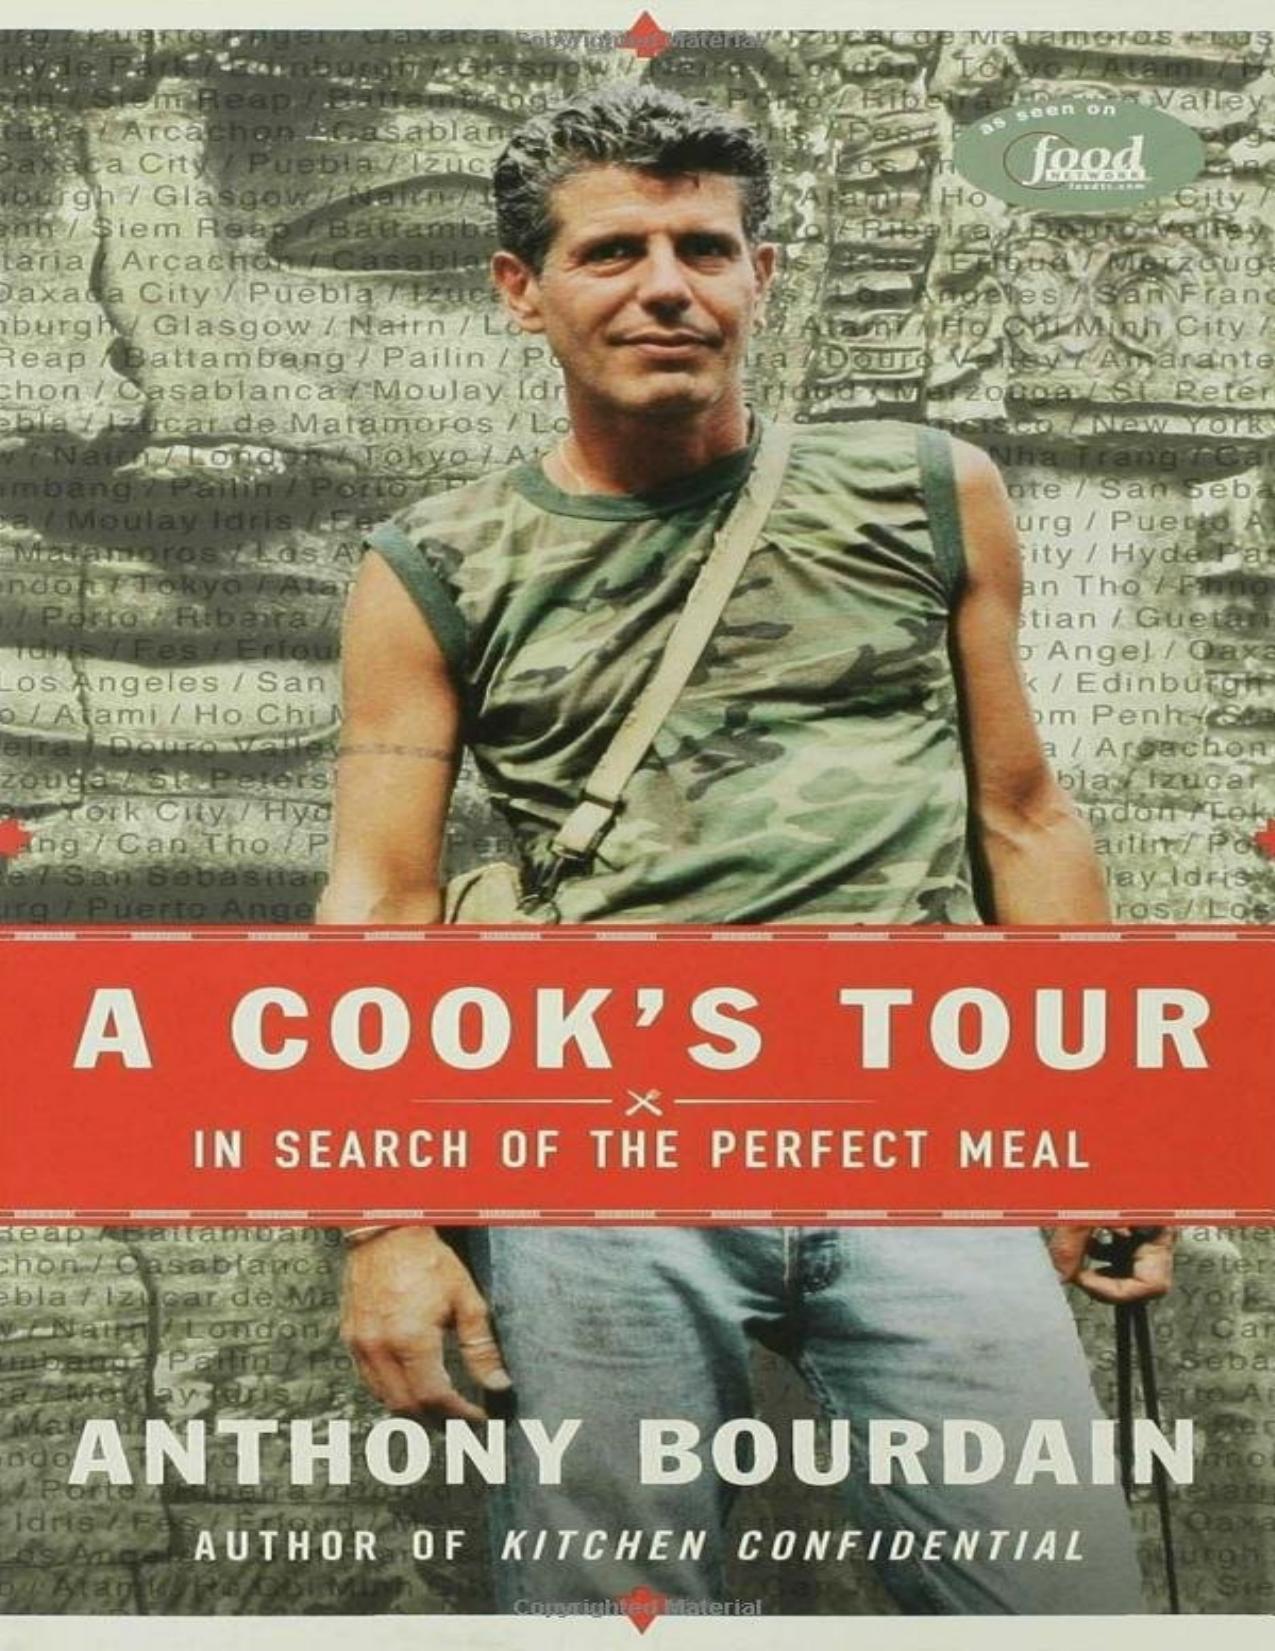 A Cook's Tour by Anthony Bourdain